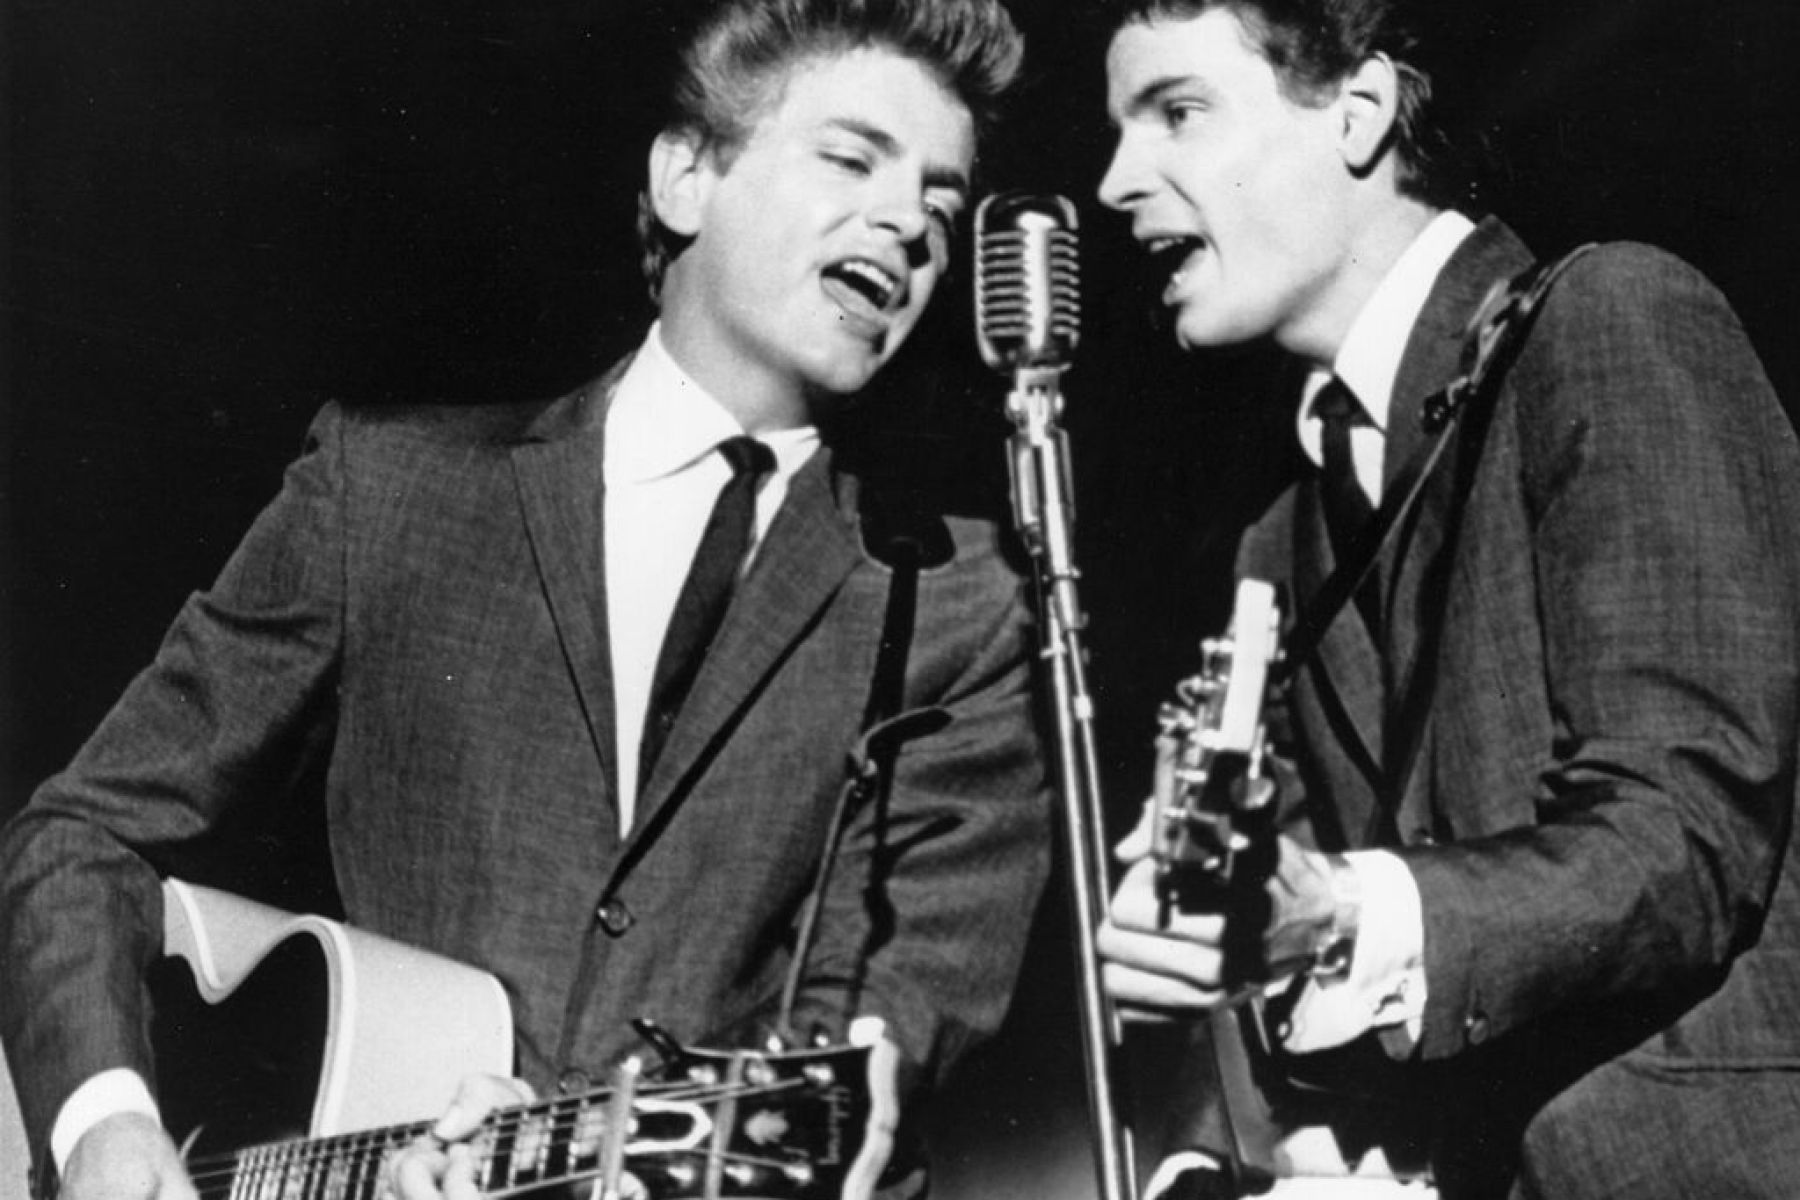 Popular musical duo Phil and Don Everly recording at the Warner Brothers studio in Hollywood, 1963.   (Photo by Keystone/Getty Images)